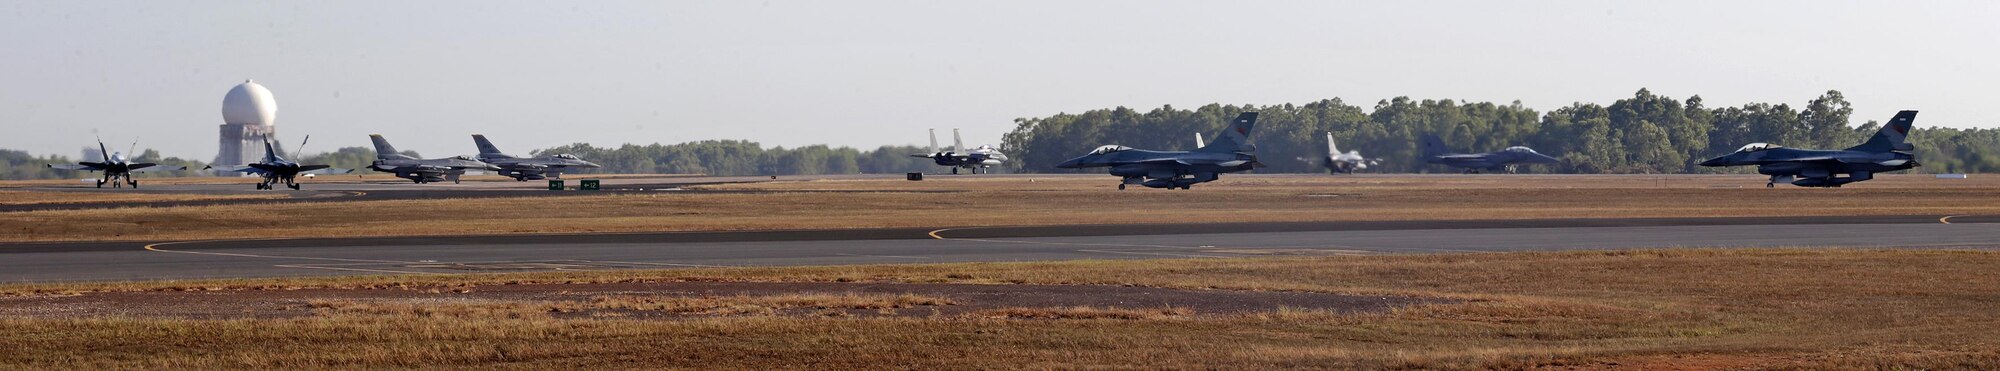 Royal Australian Air Force (RAAF) FA-18A Hornets, U.S. Air Force and Indonesian Air Force F-16s, and Republic of Singapore Air Force F-15s, prepare to take off for a morning sortie during Exercise Pitch Black, at RAAF Base Darwin, Australia, Aug. 2, 2016. Pitch Black is a biennial multinational air warfare exercise hosted by the RAAF that focuses on offensive counter air and defensive counter air combat in a simulated war environment. (Australian Defence Force photo by LSIS Jayson Tufrey)